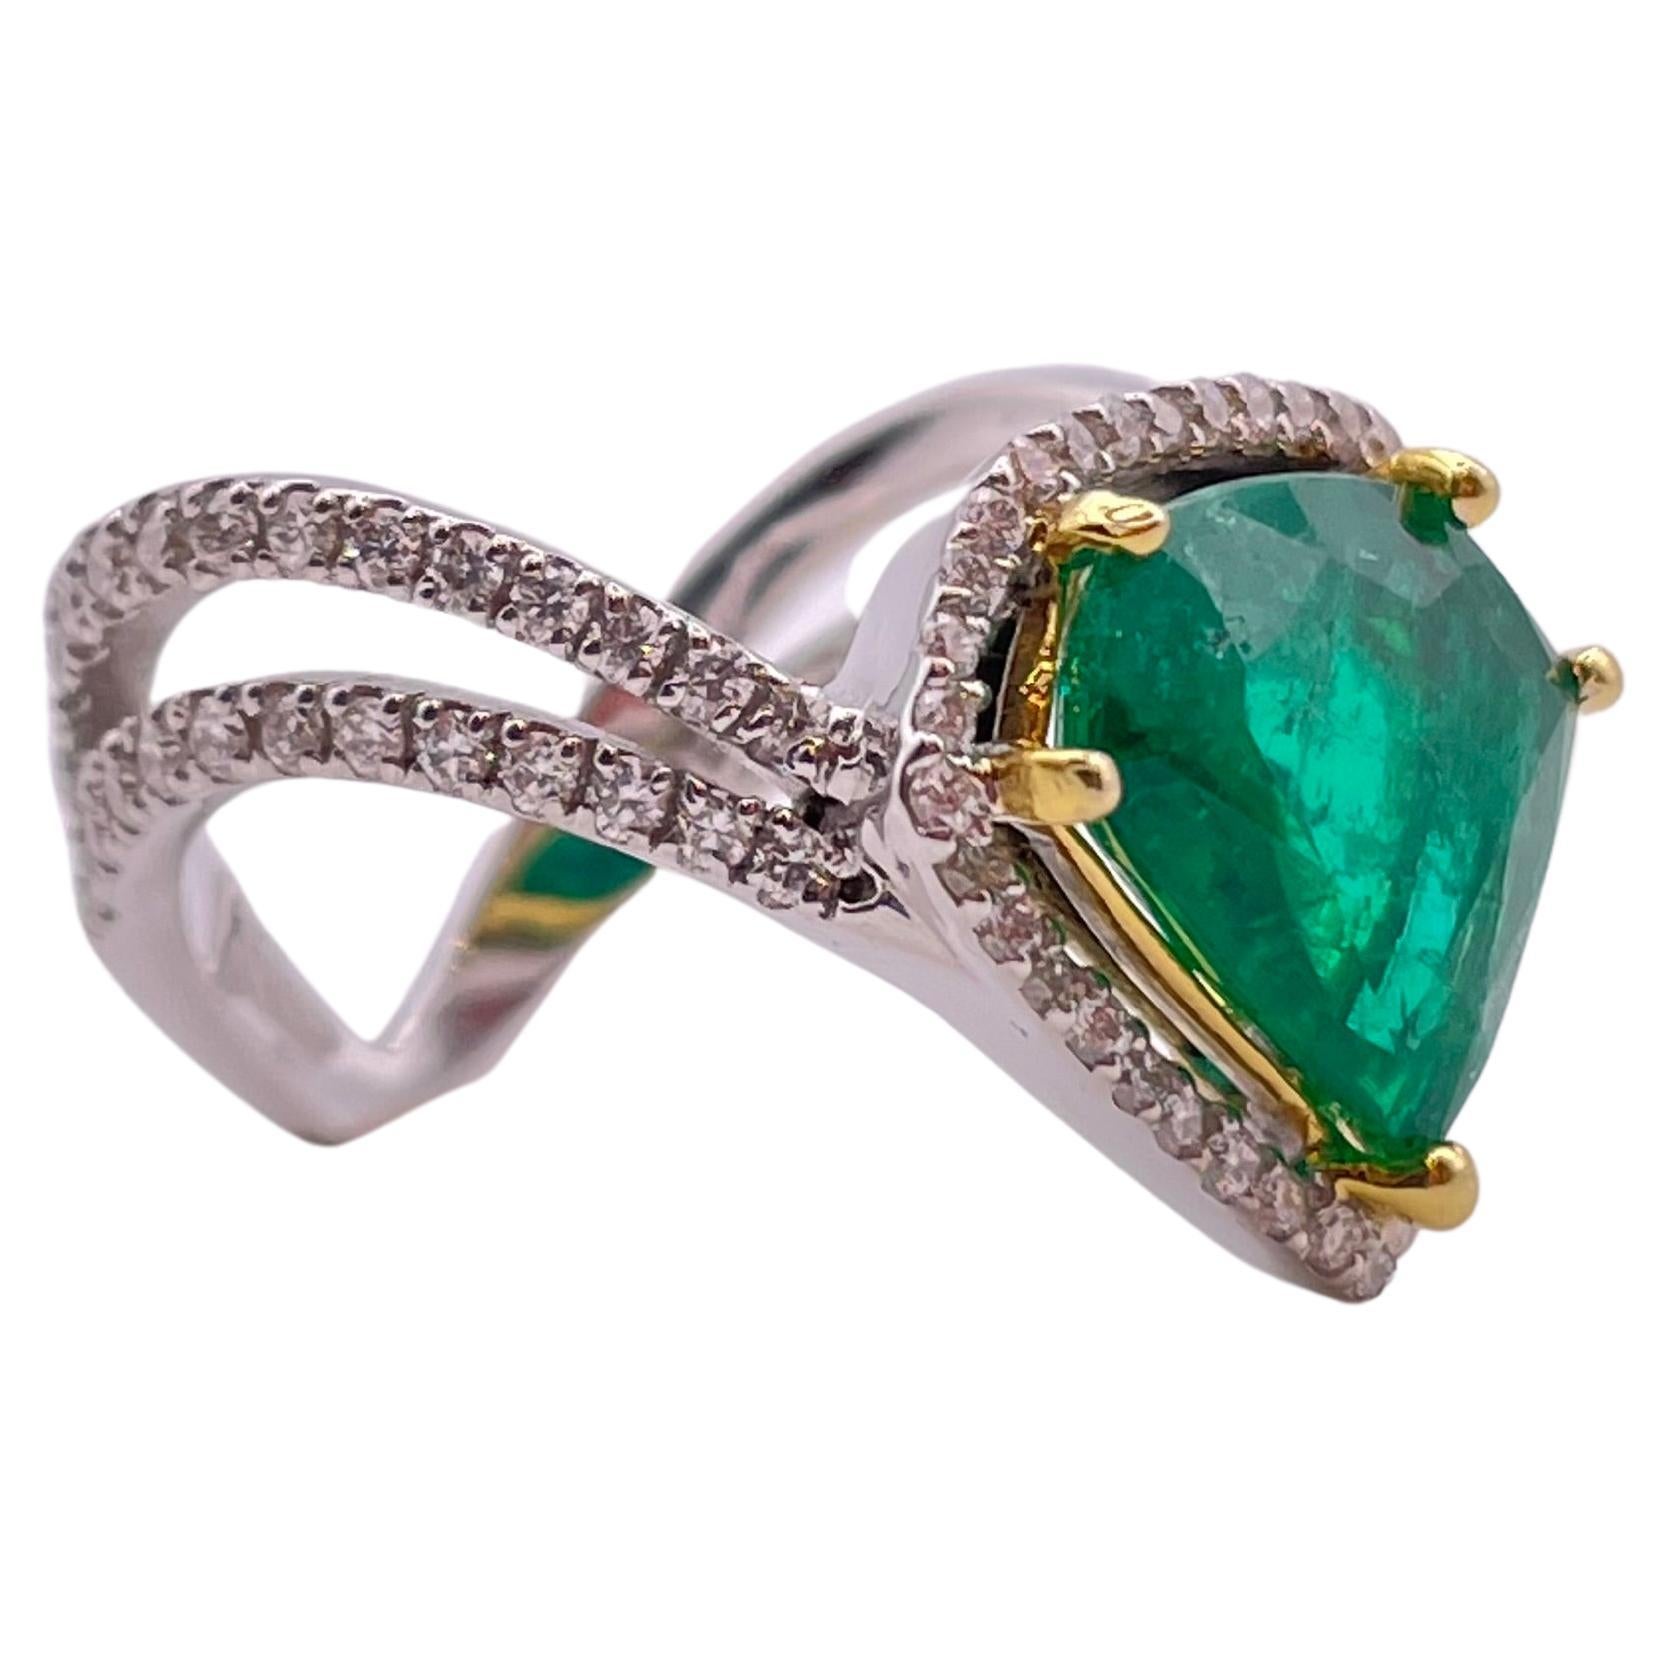 Certificated 2.61 Carats Fine Emerald and Diamond Ring